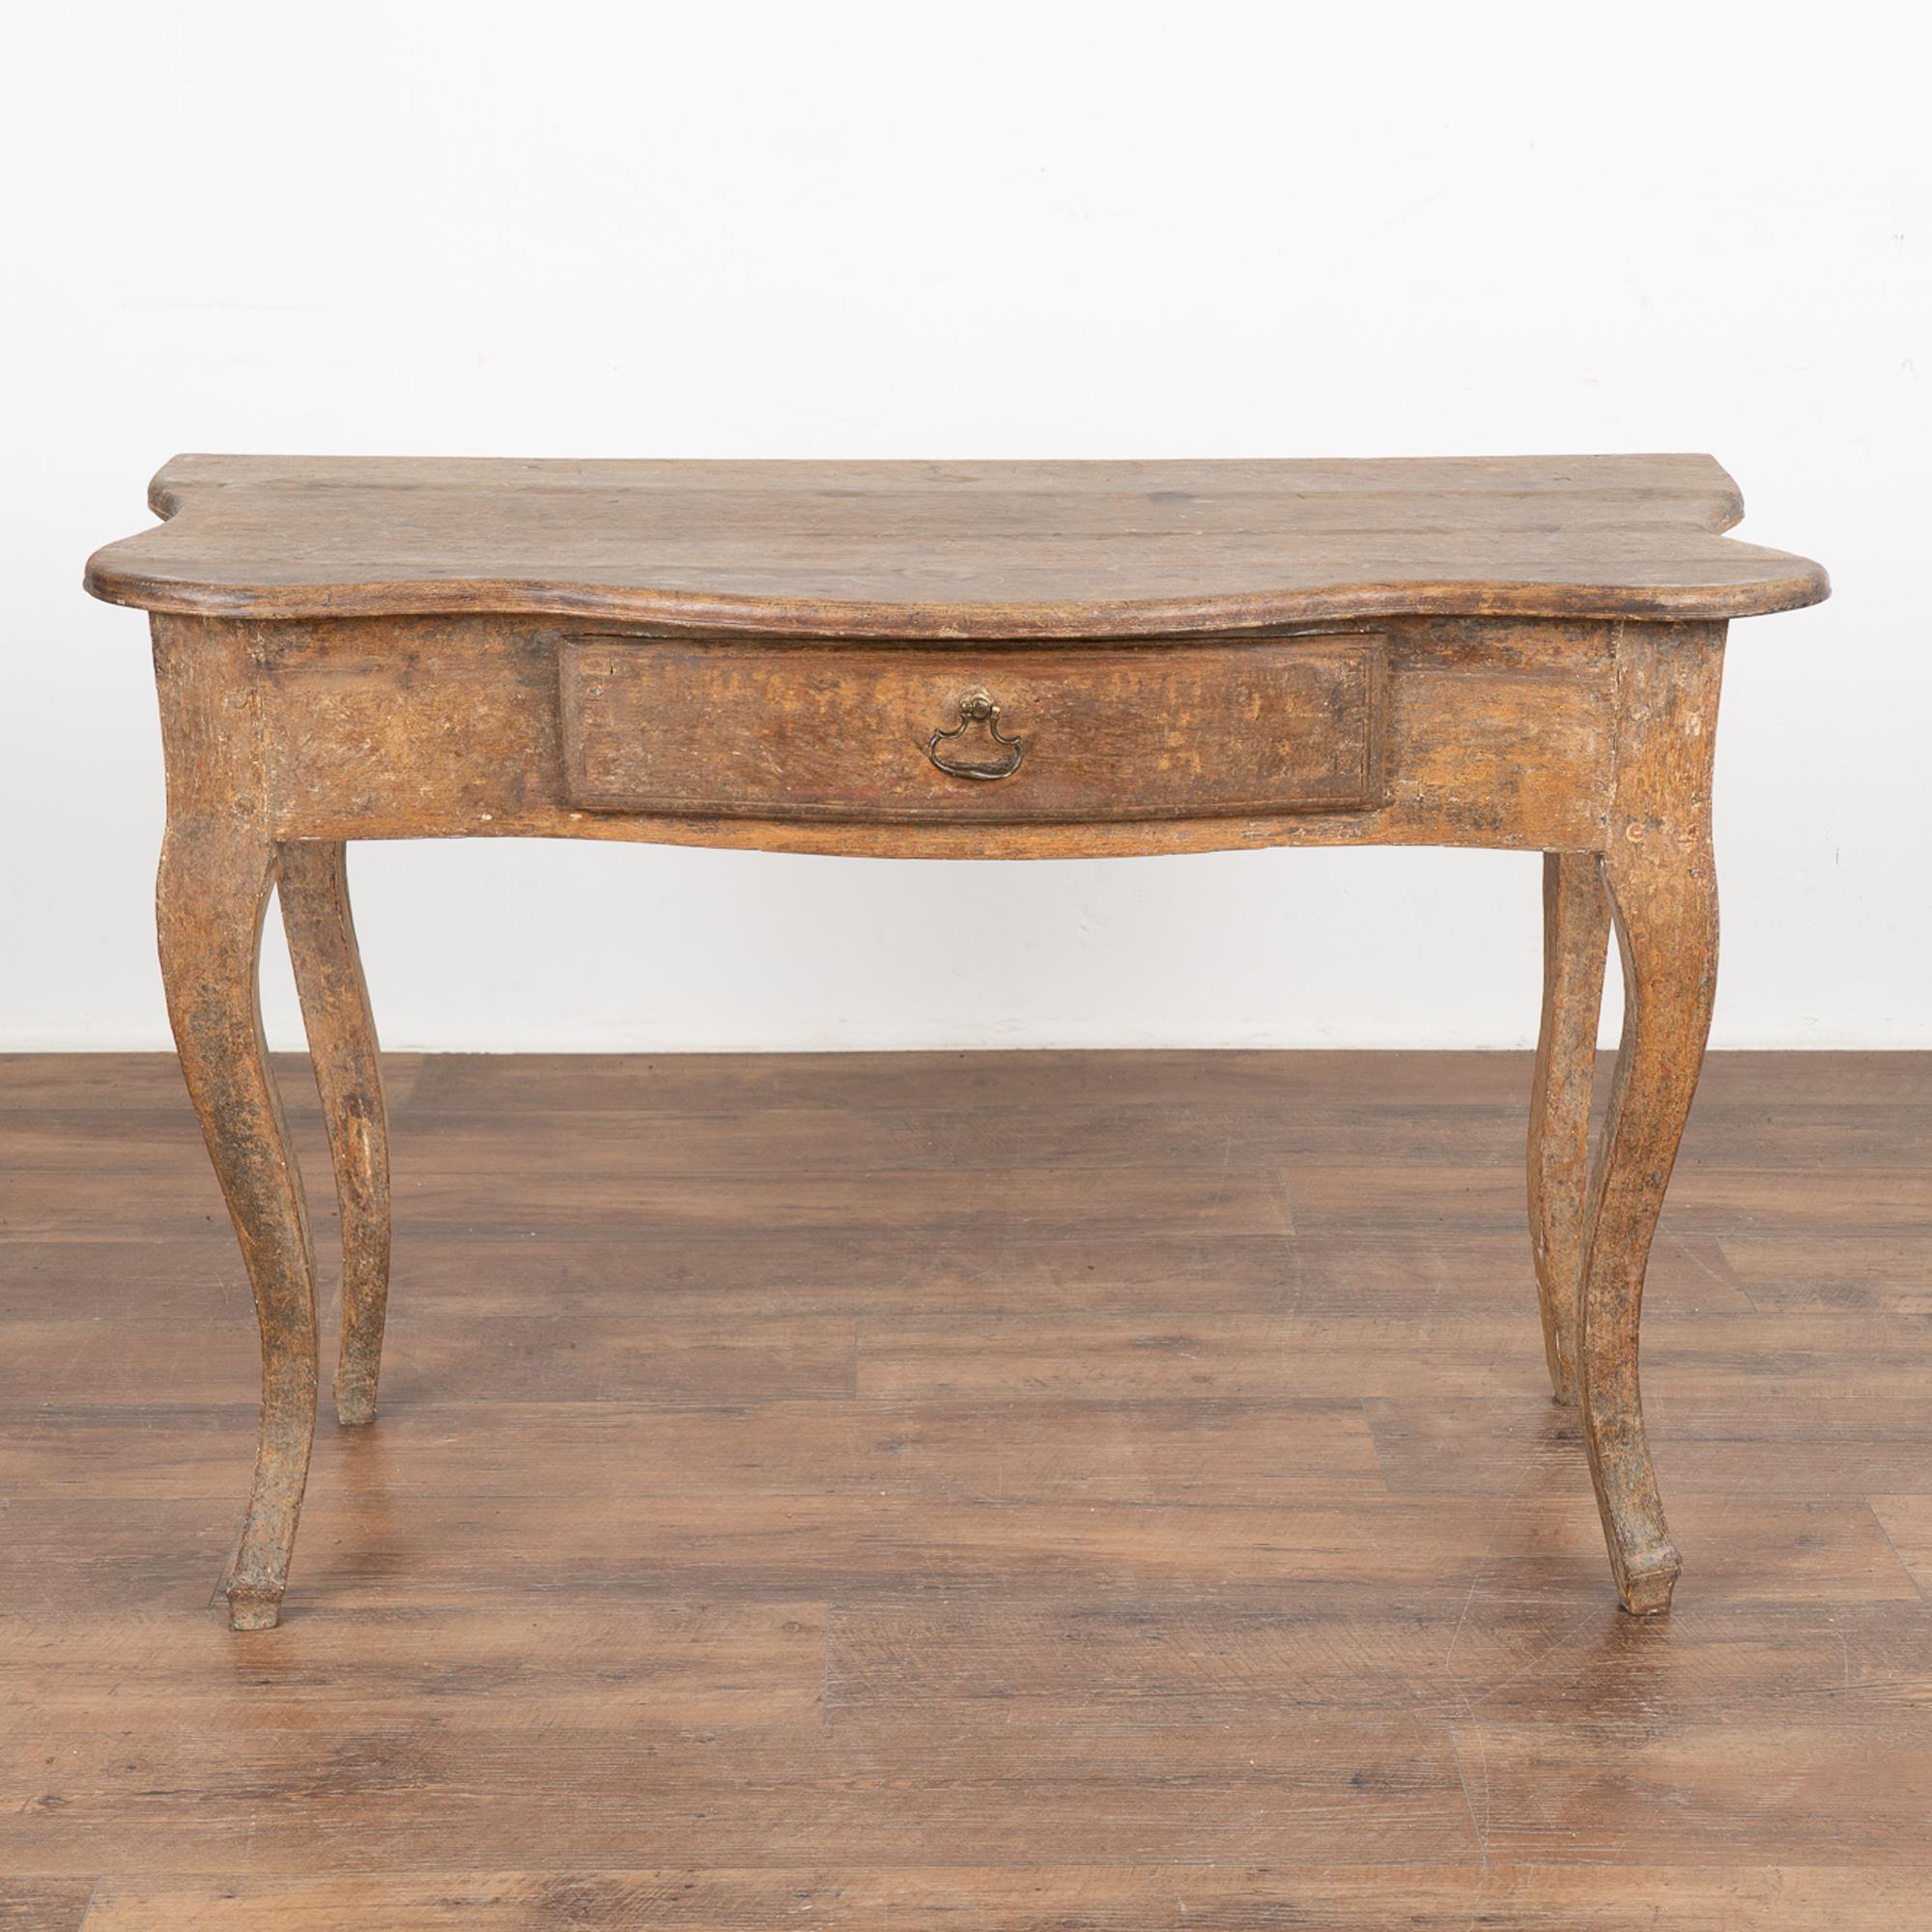 Antique Rococo Pine Side Table with Drawer, Sweden circa 1770-80 In Good Condition For Sale In Round Top, TX